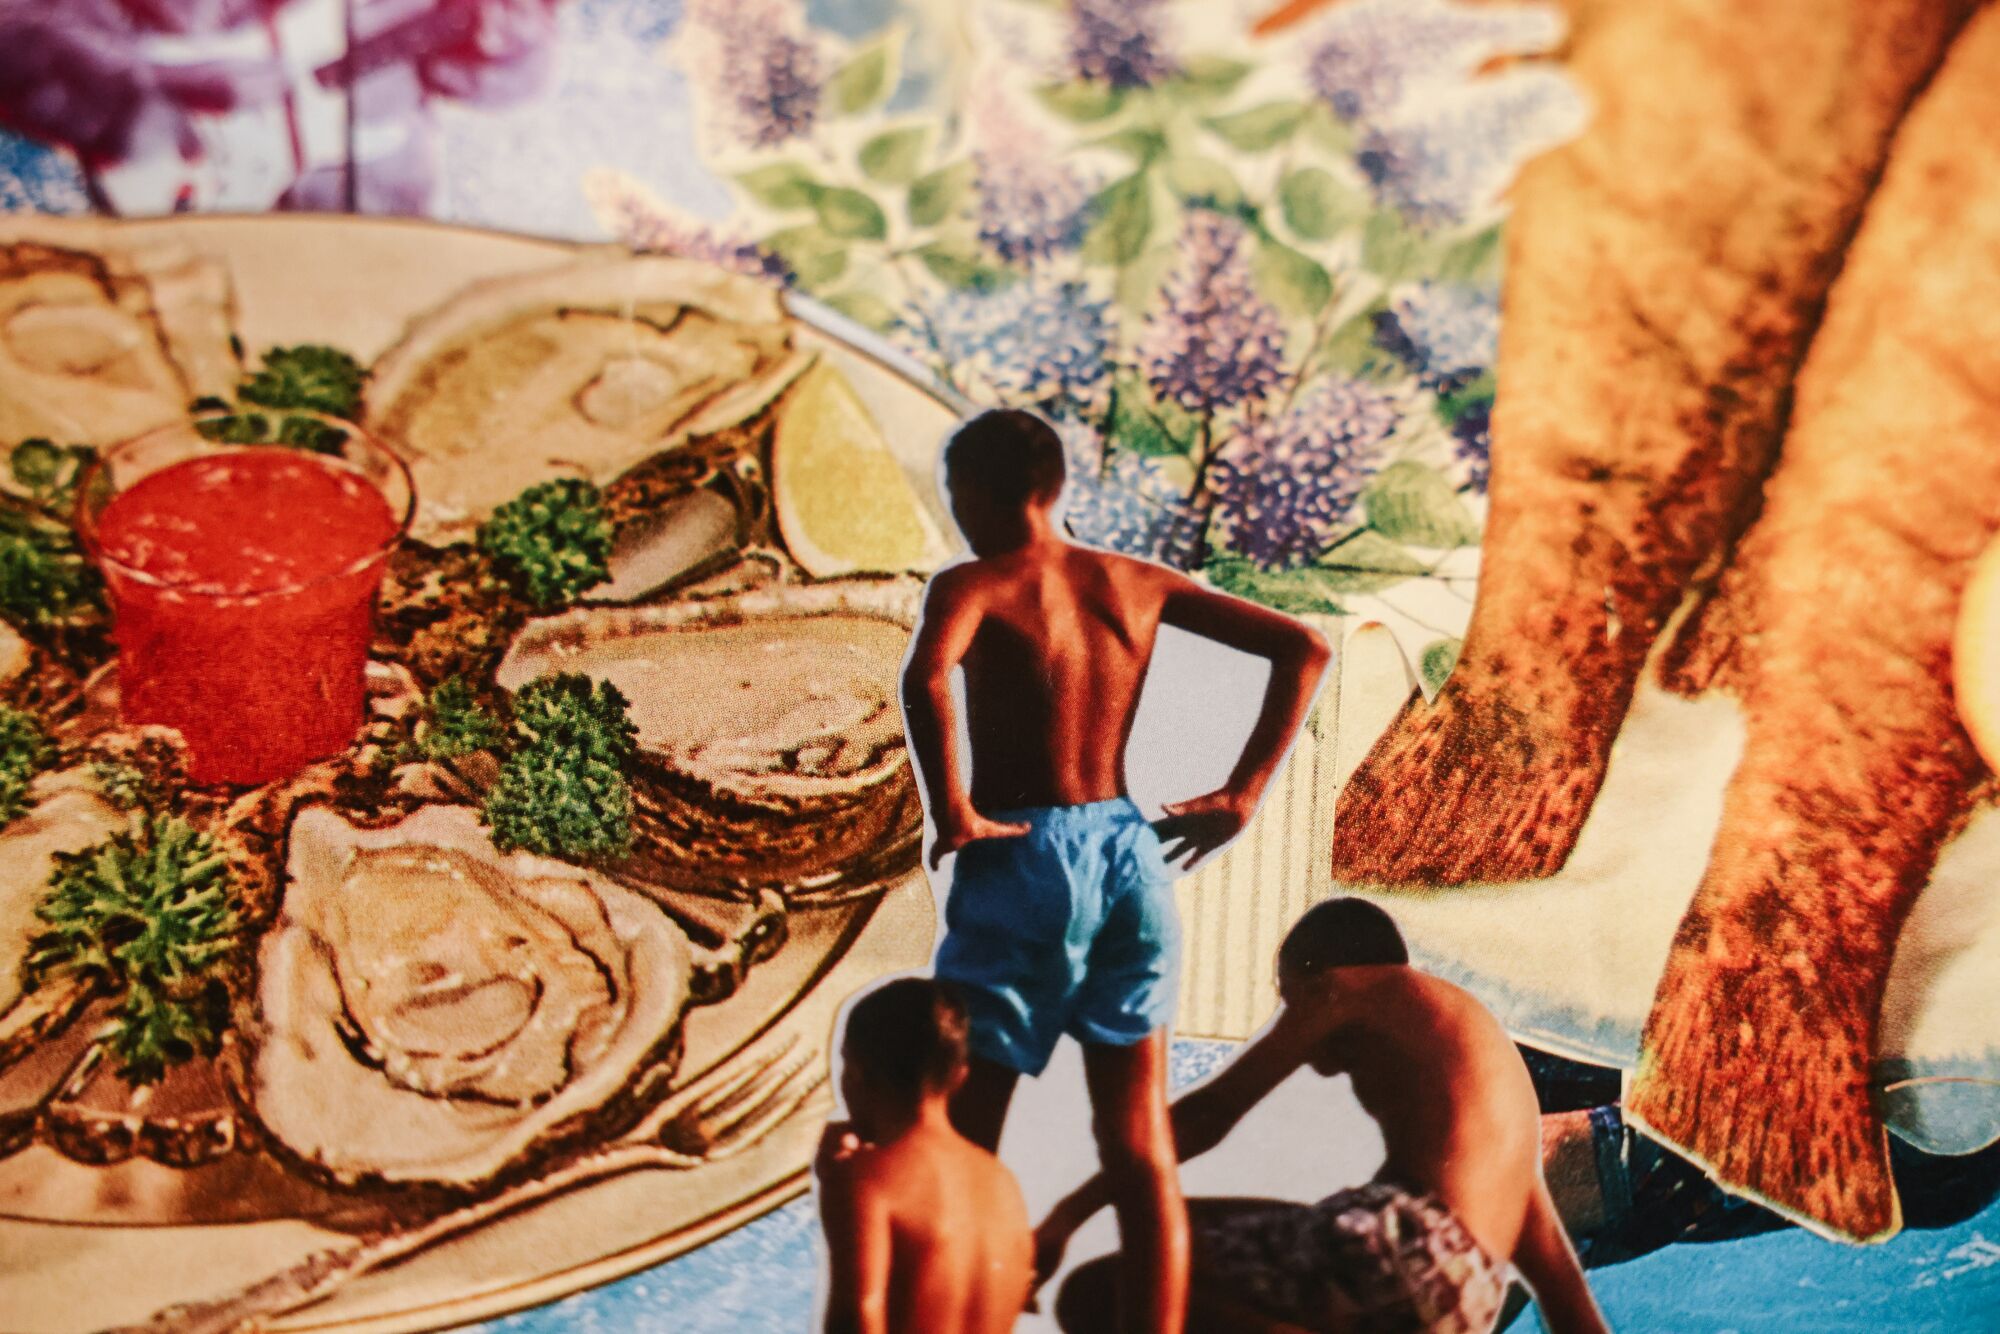 A collage made during a Collage Club meetup with men in swim trunks, oysters on a platter and more.